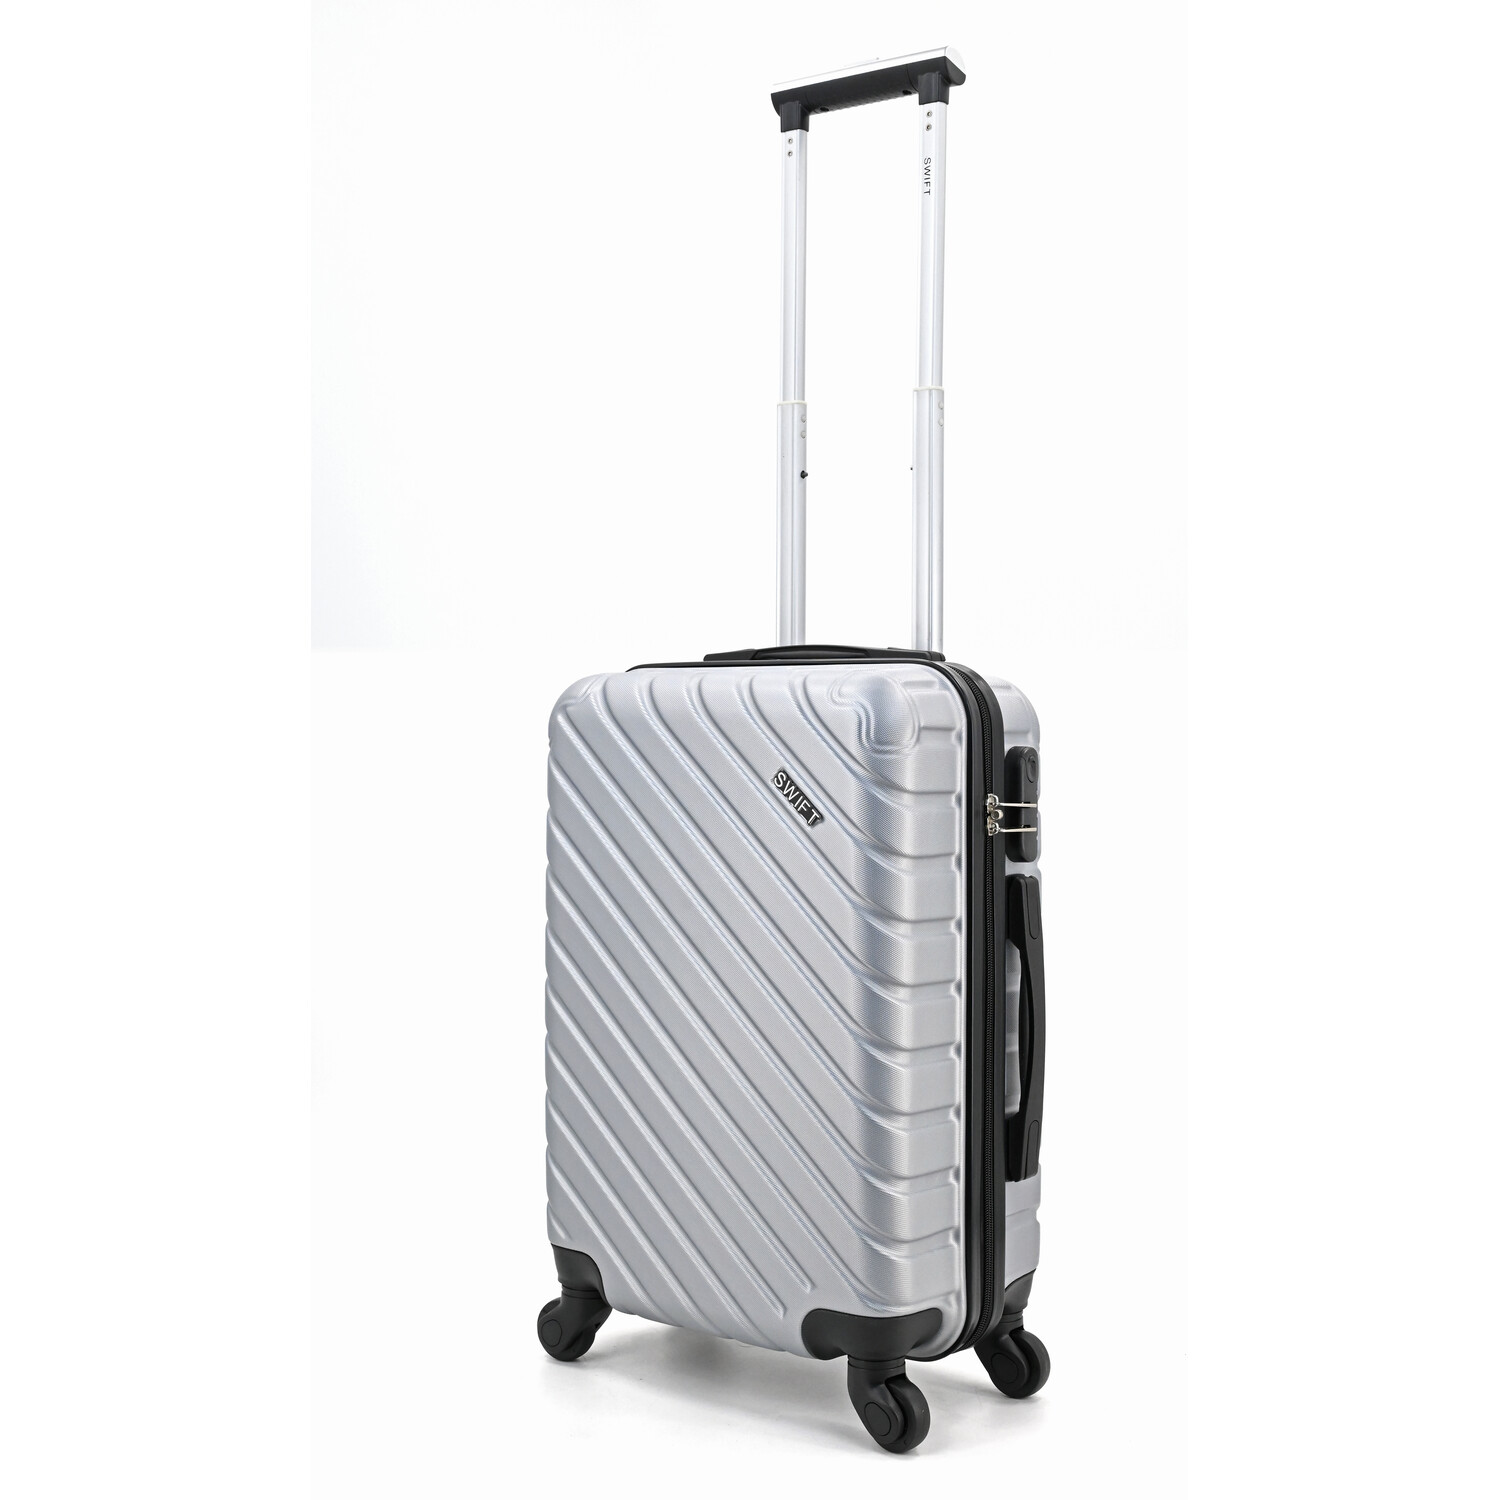 Swift Astral Suitcase - Silver / Cabin Case Image 2